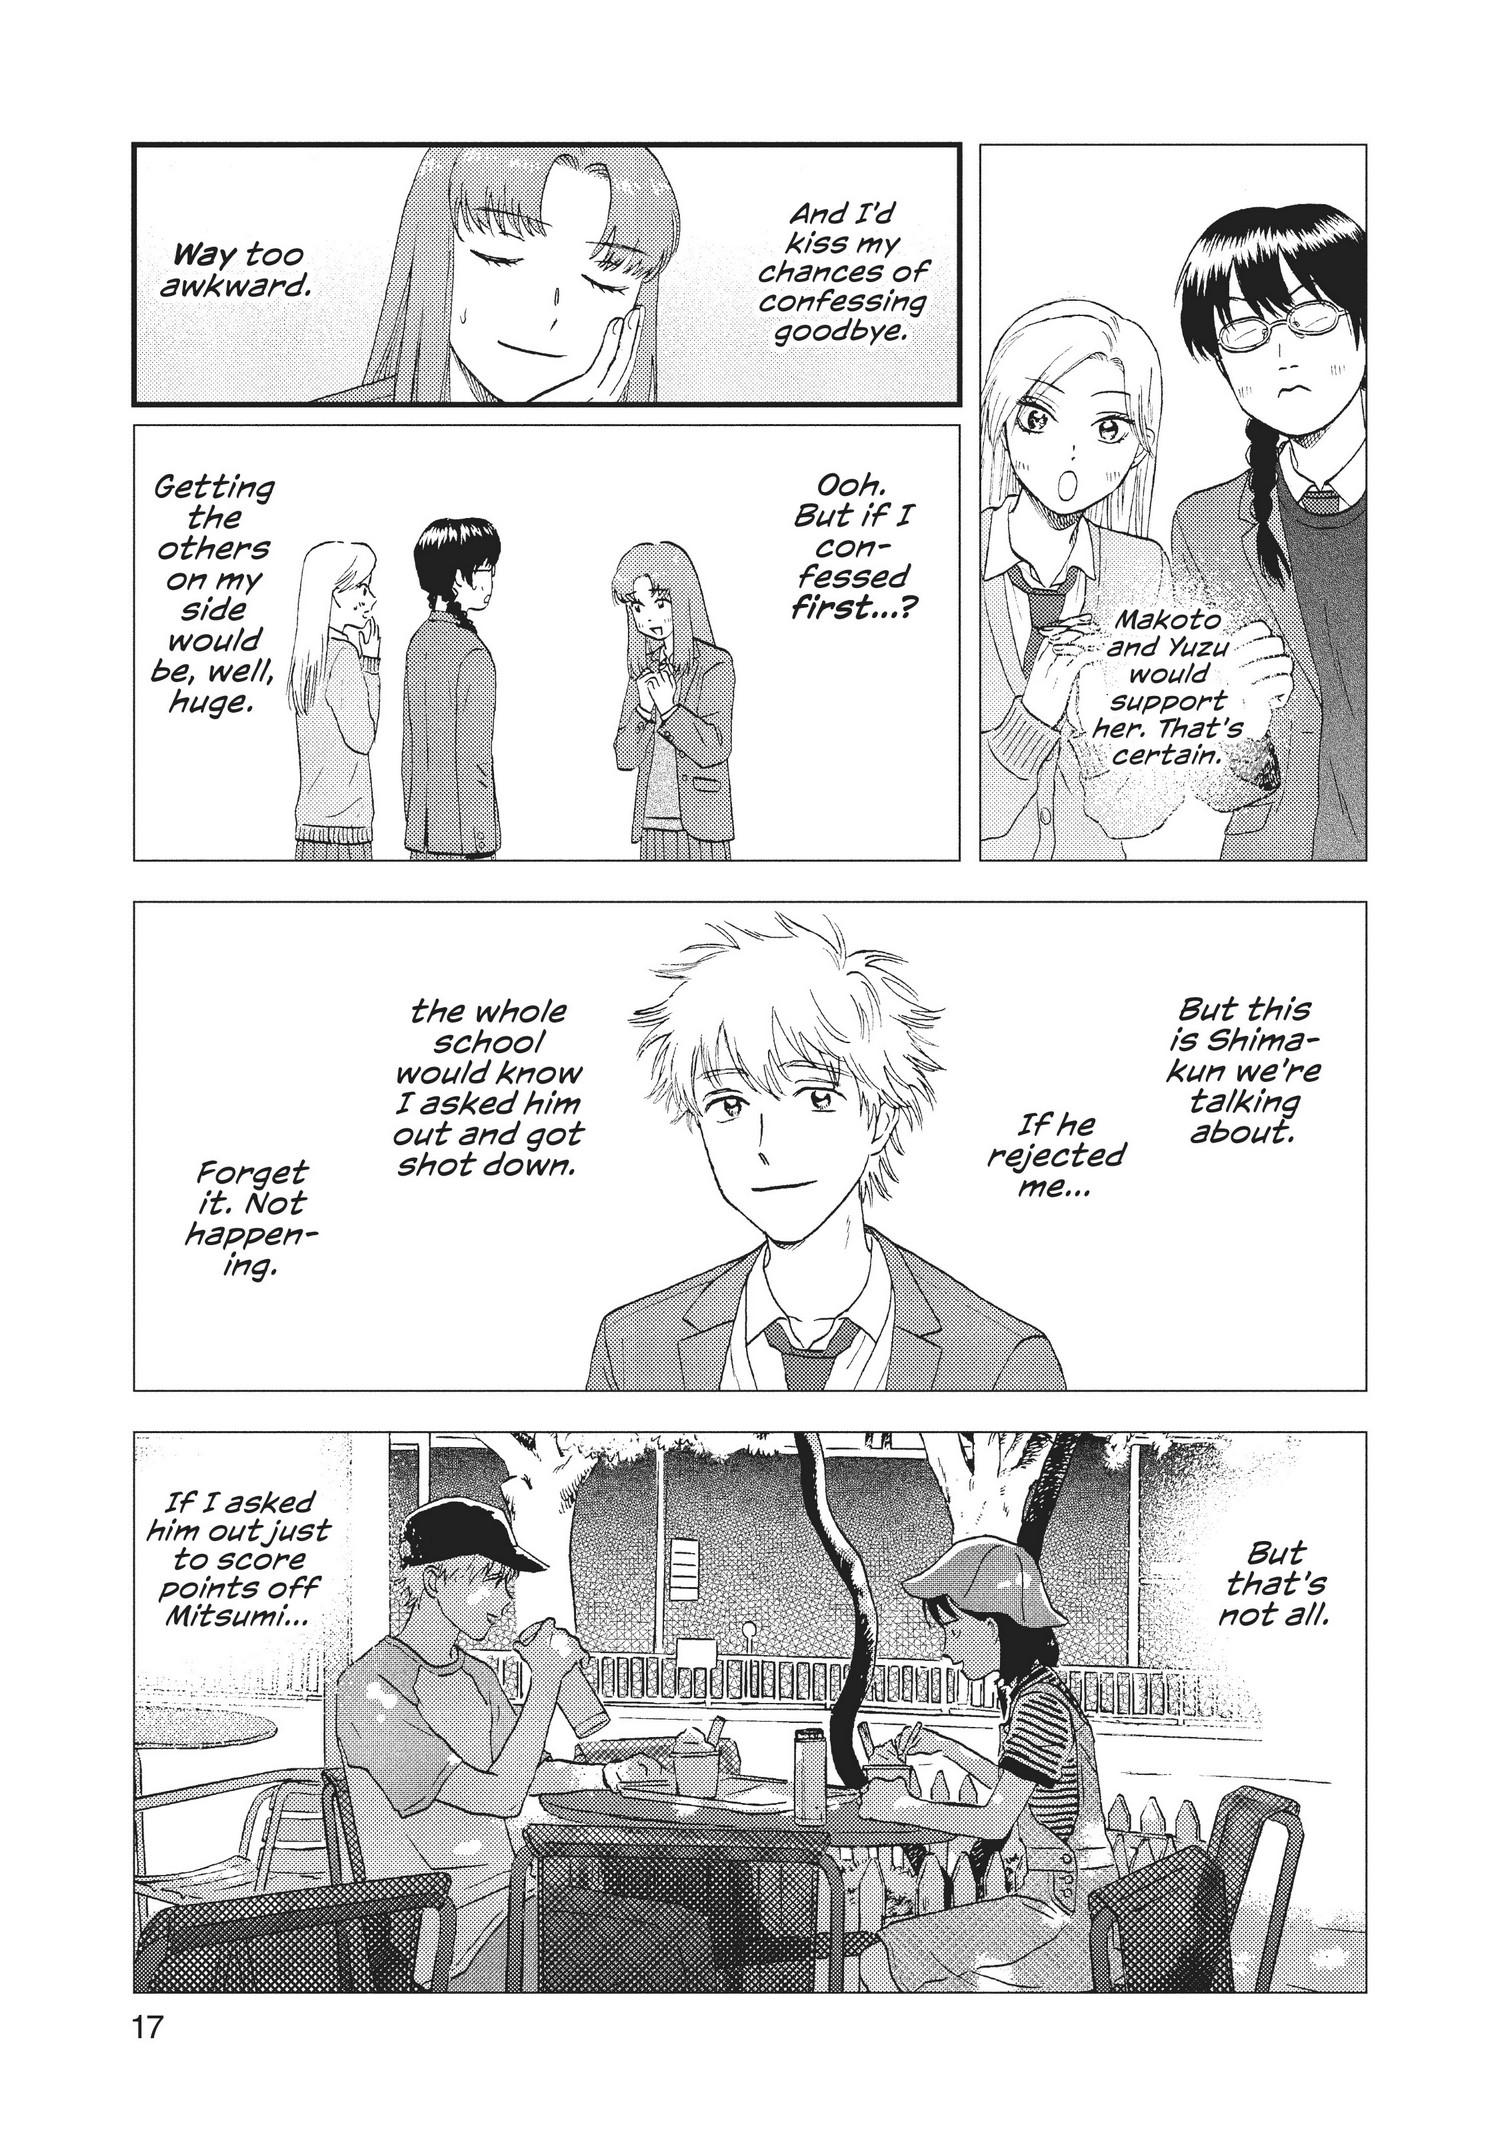 Skip to Loafer Vol.3 Ch.12-17 Page 57 - Mangago